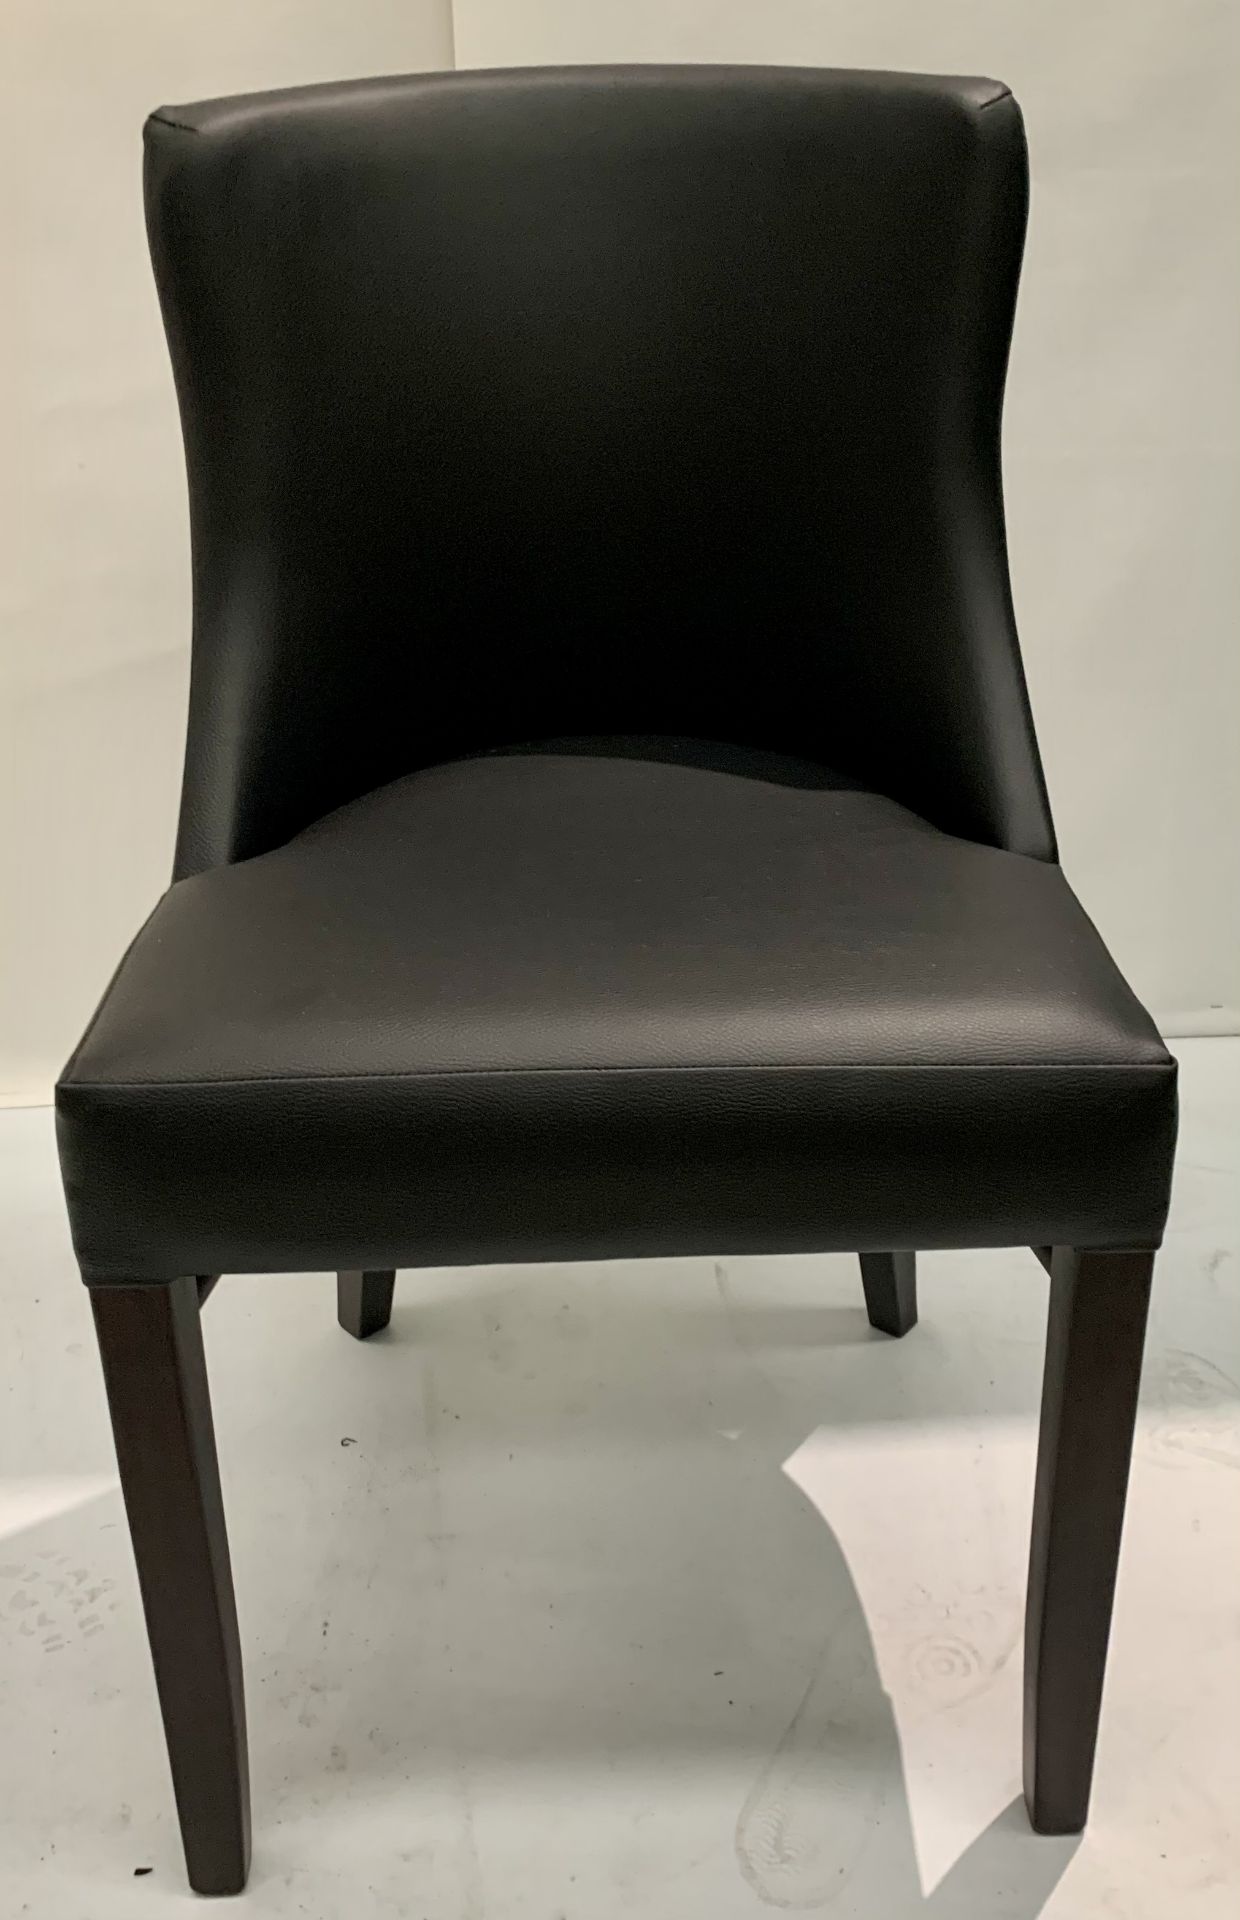 1 x Leona walnut coloured framed dining chair with black leather effect seat